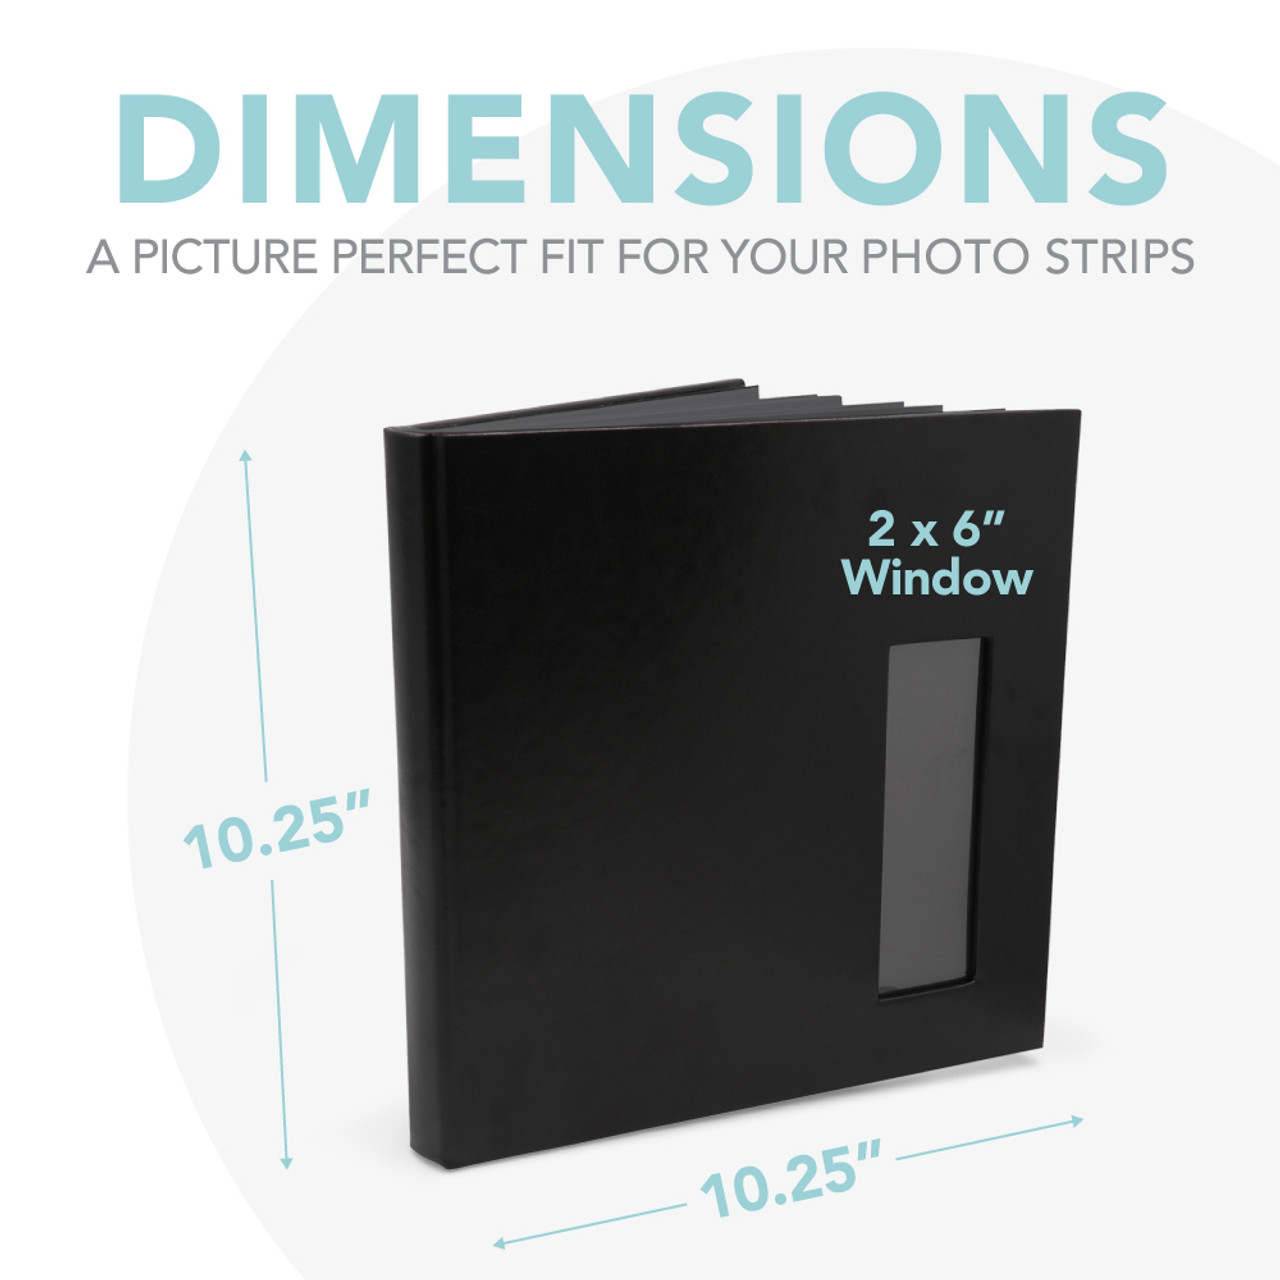 Photo Booth Frames - Black Cover Photo Booth Memory Album DIY Picture Scrapbook with 2x6 inch Photo Strip Inserts - 40 White Pages